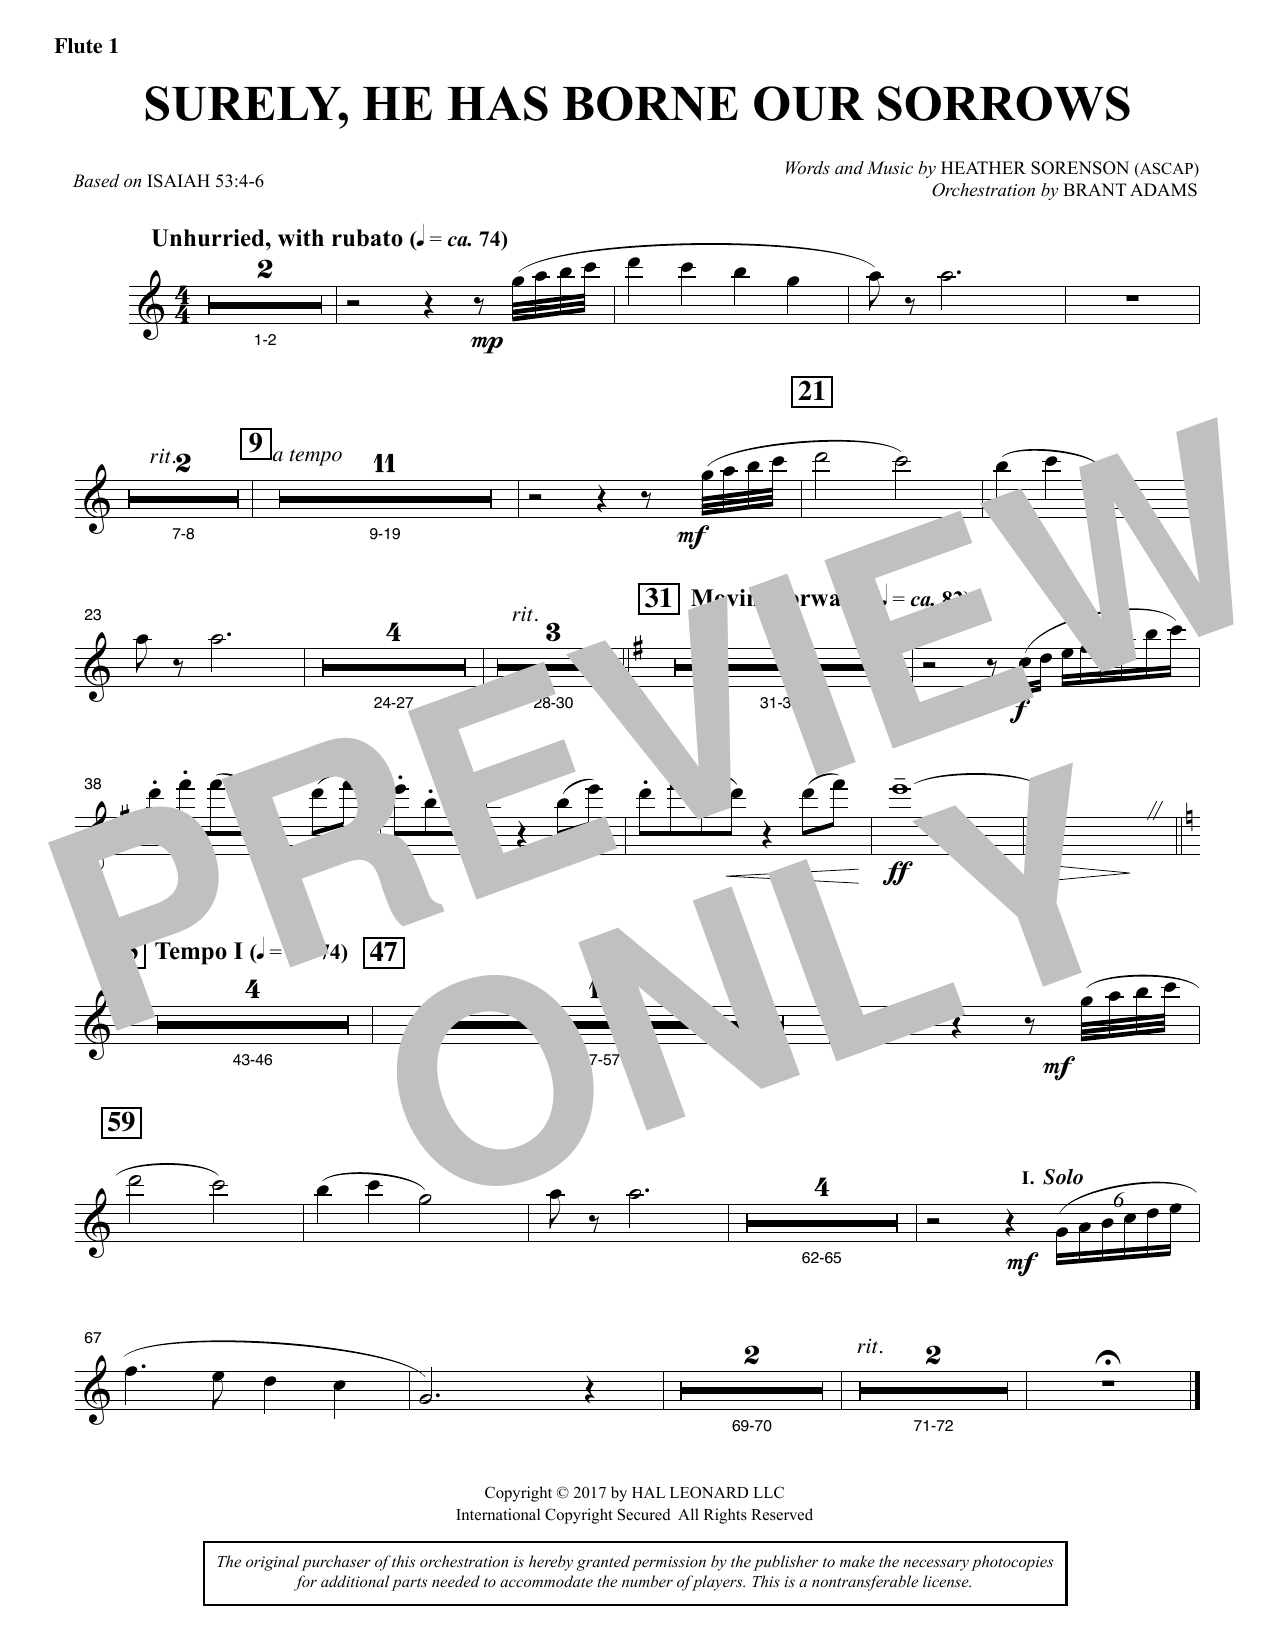 Download Heather Sorenson Surely, He Has Borne Our Sorrows - Flut Sheet Music